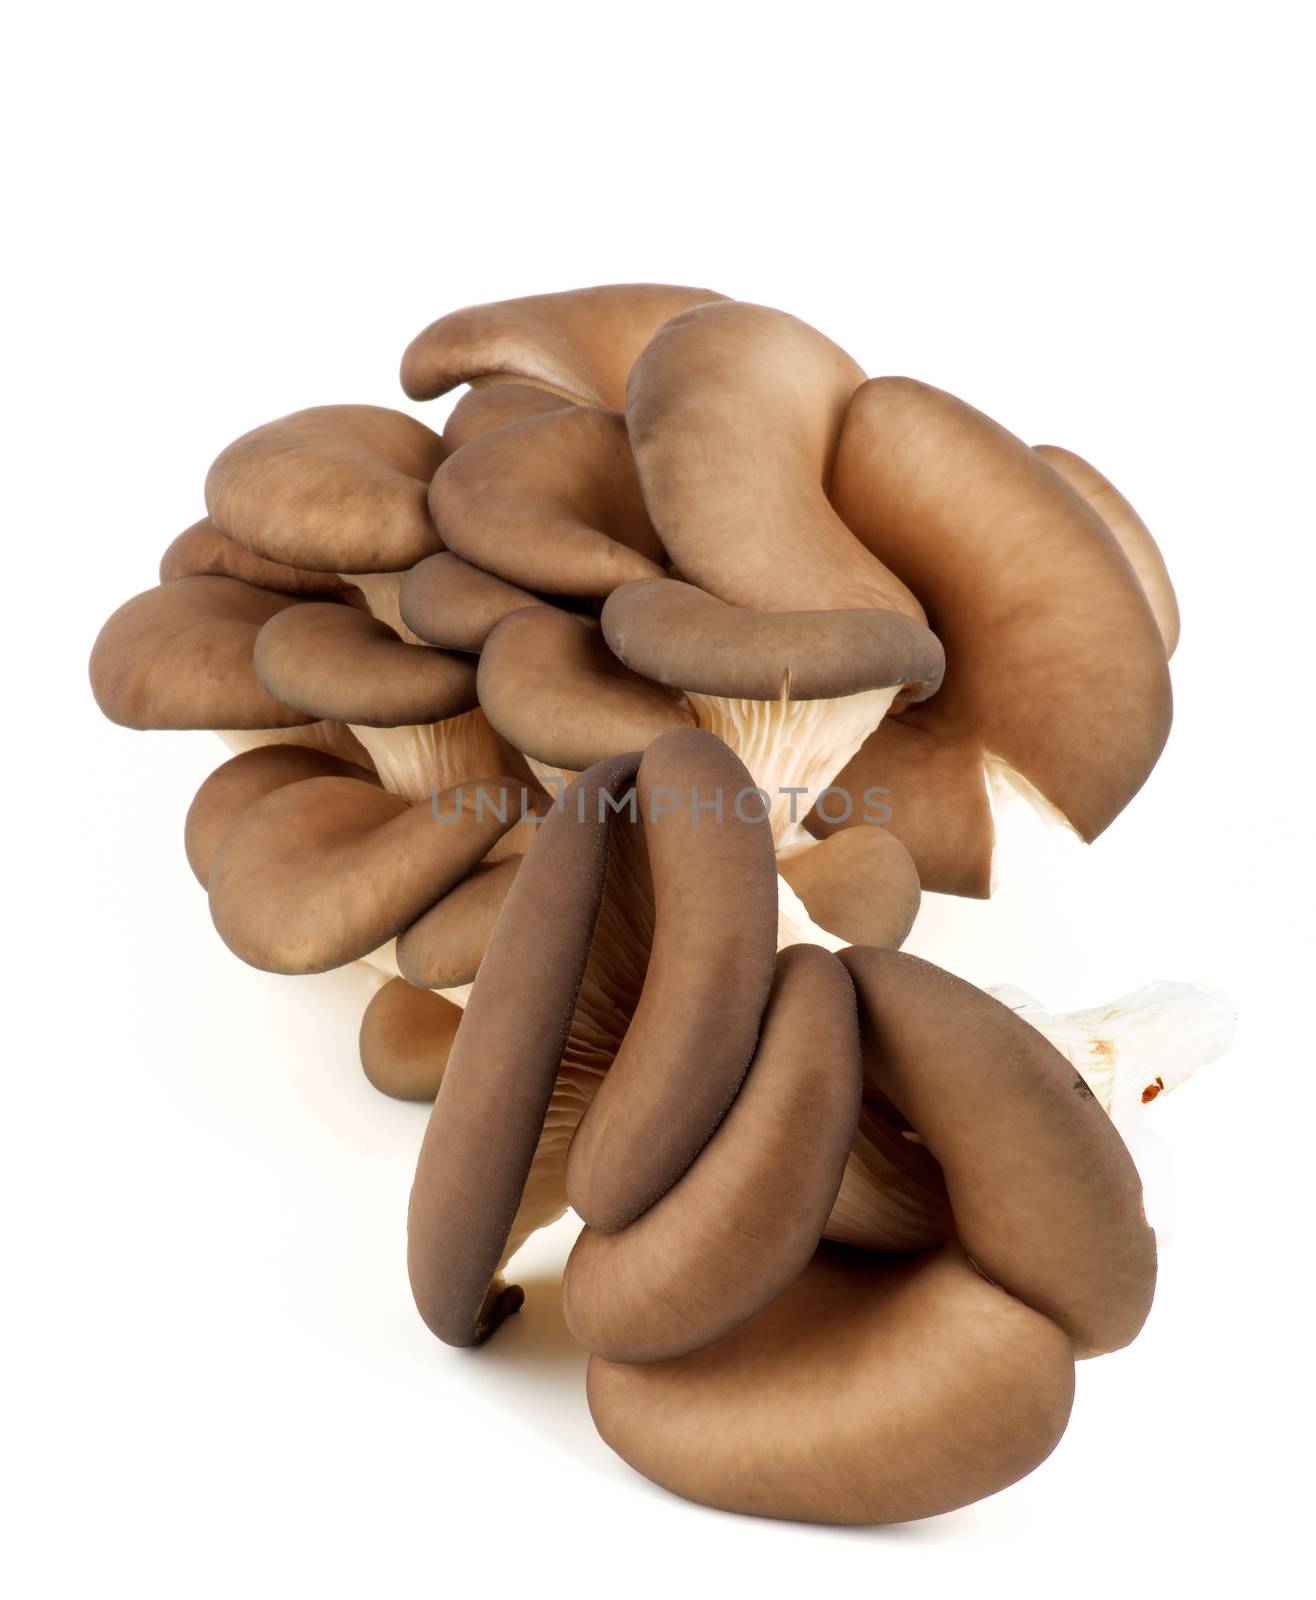 Big Heap of Raw Oyster Mushrooms isolated on White background